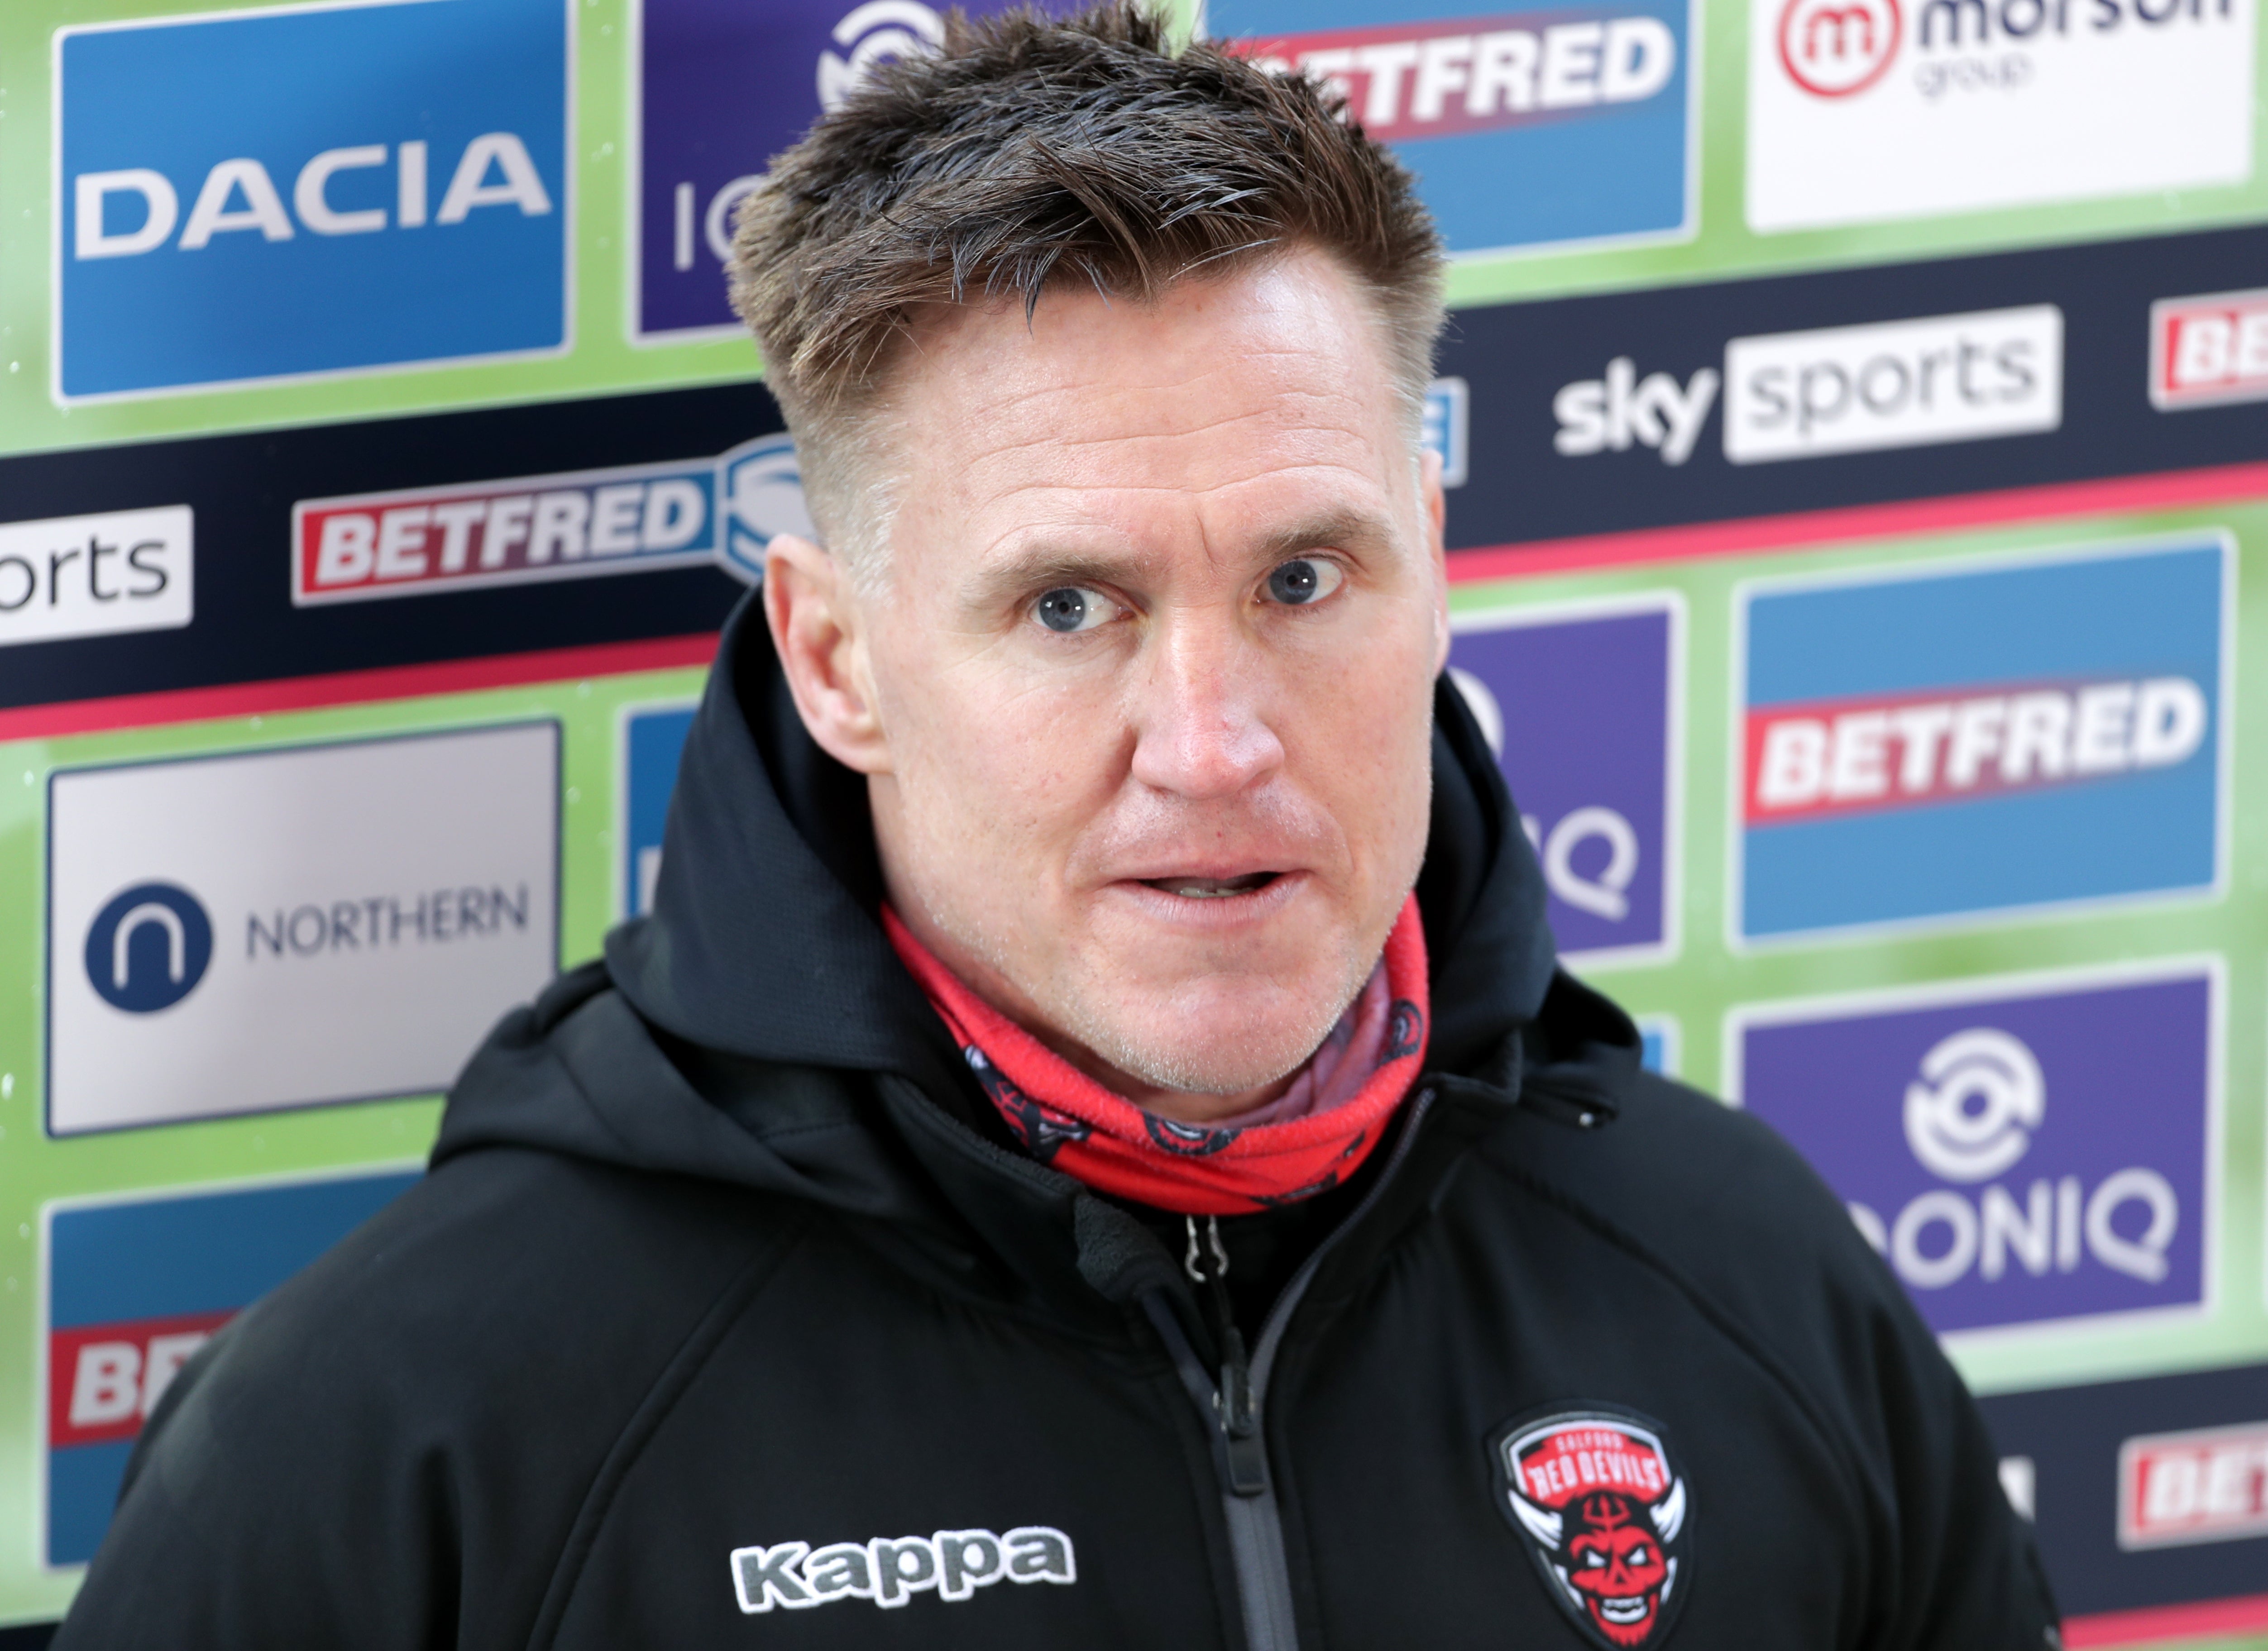 Salford head coach Richard Marshall after the Betfred Super League match at The Totally Wicked Stadium, St Helens. Picture date: Saturday April 3, 2021.